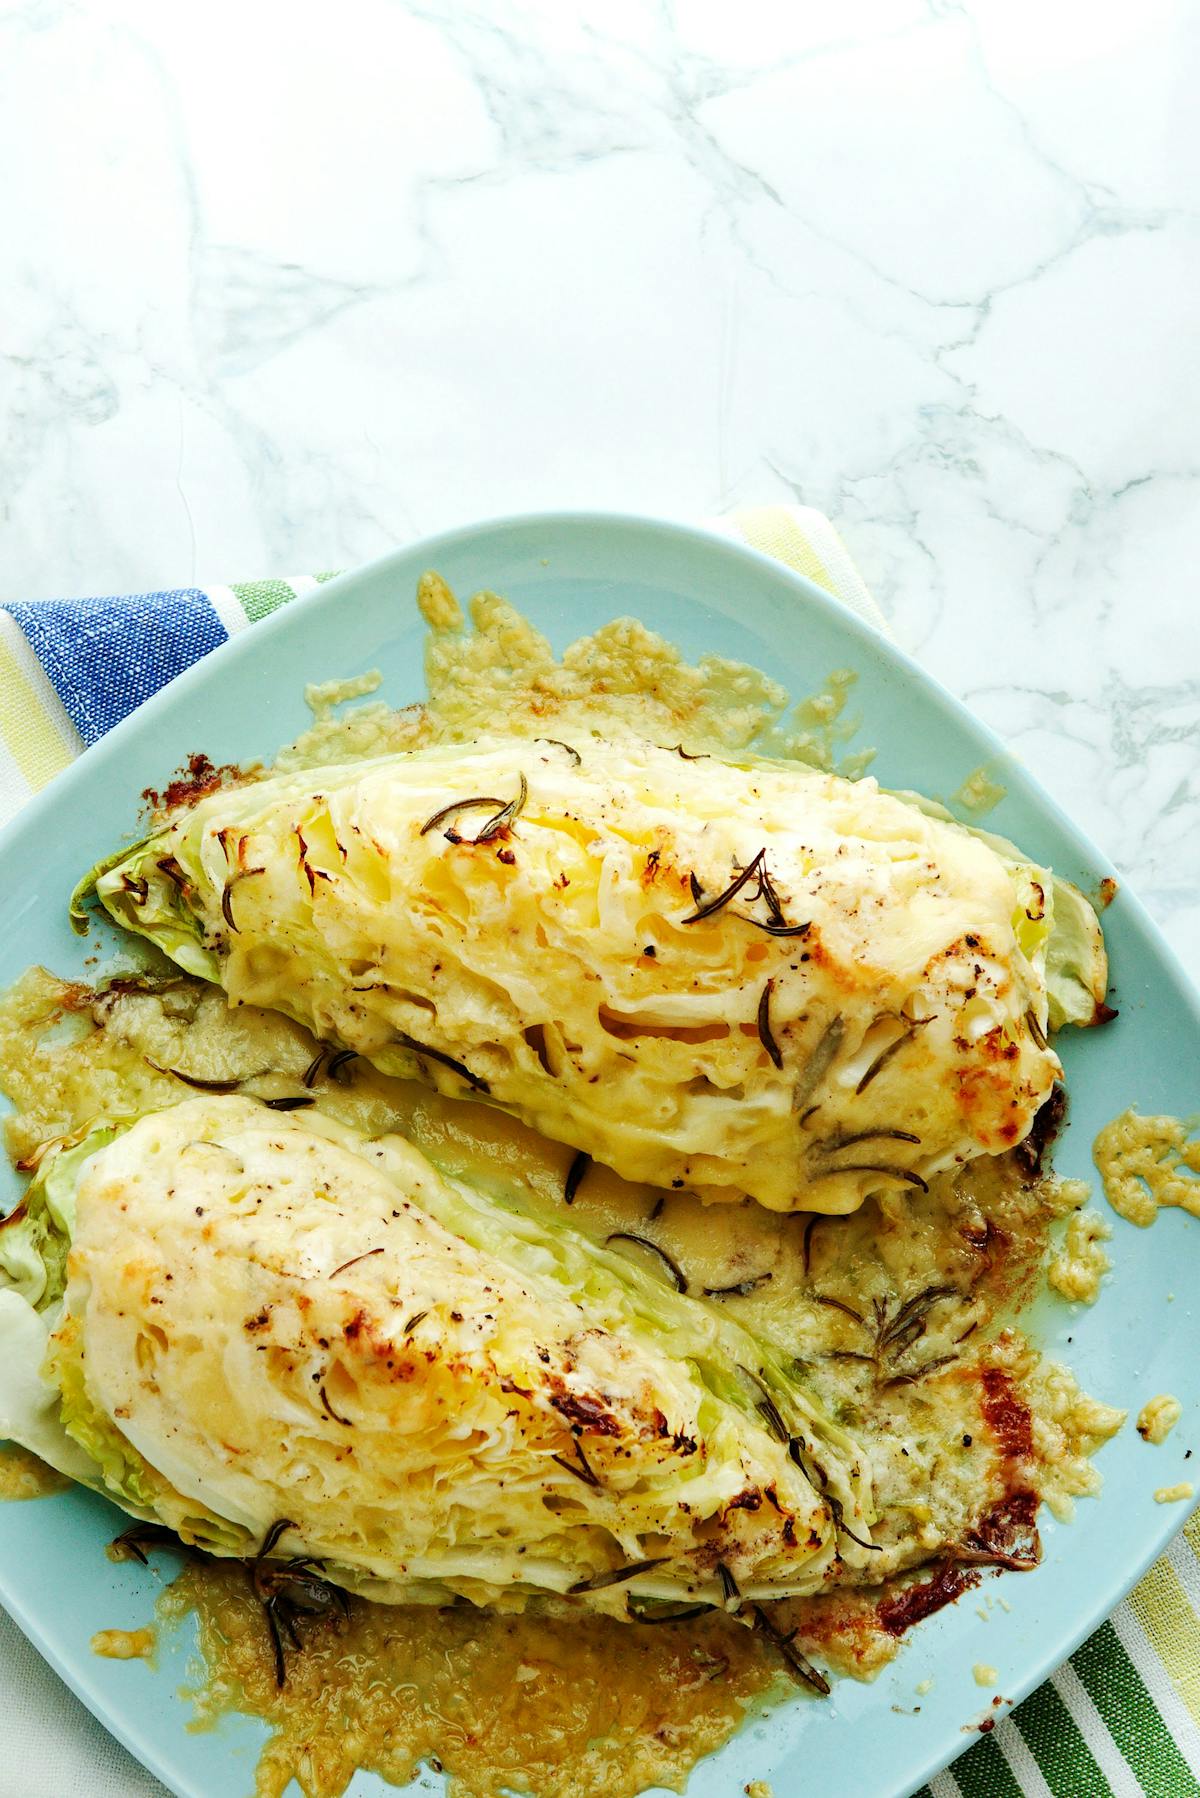 Roasted pointed cabbage with mozzarella cheese